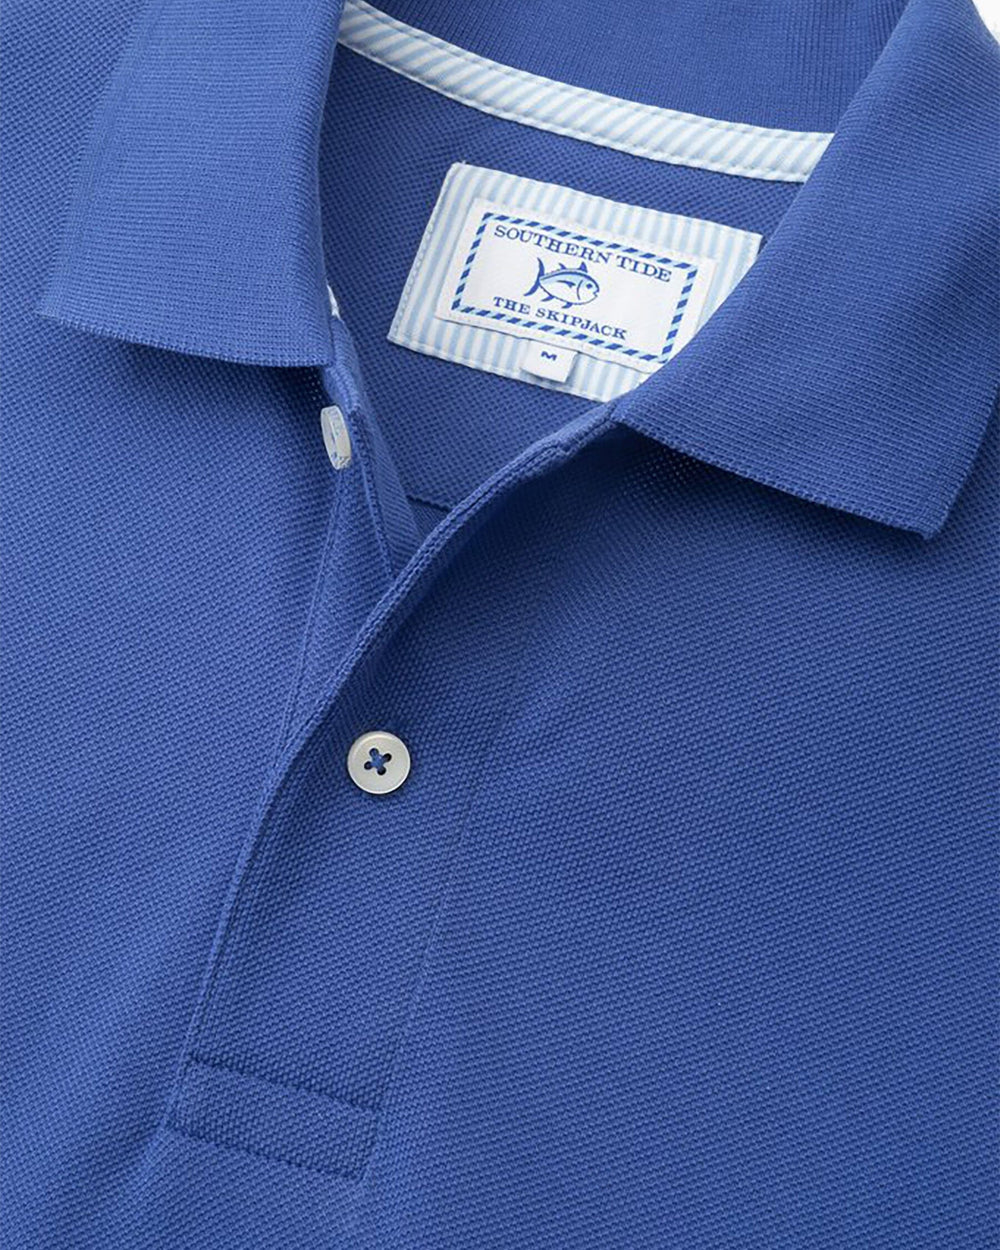 The detail view of the Men's Light Blue Skipjack Gameday Colors Polo Shirt by Southern Tide - University Blue